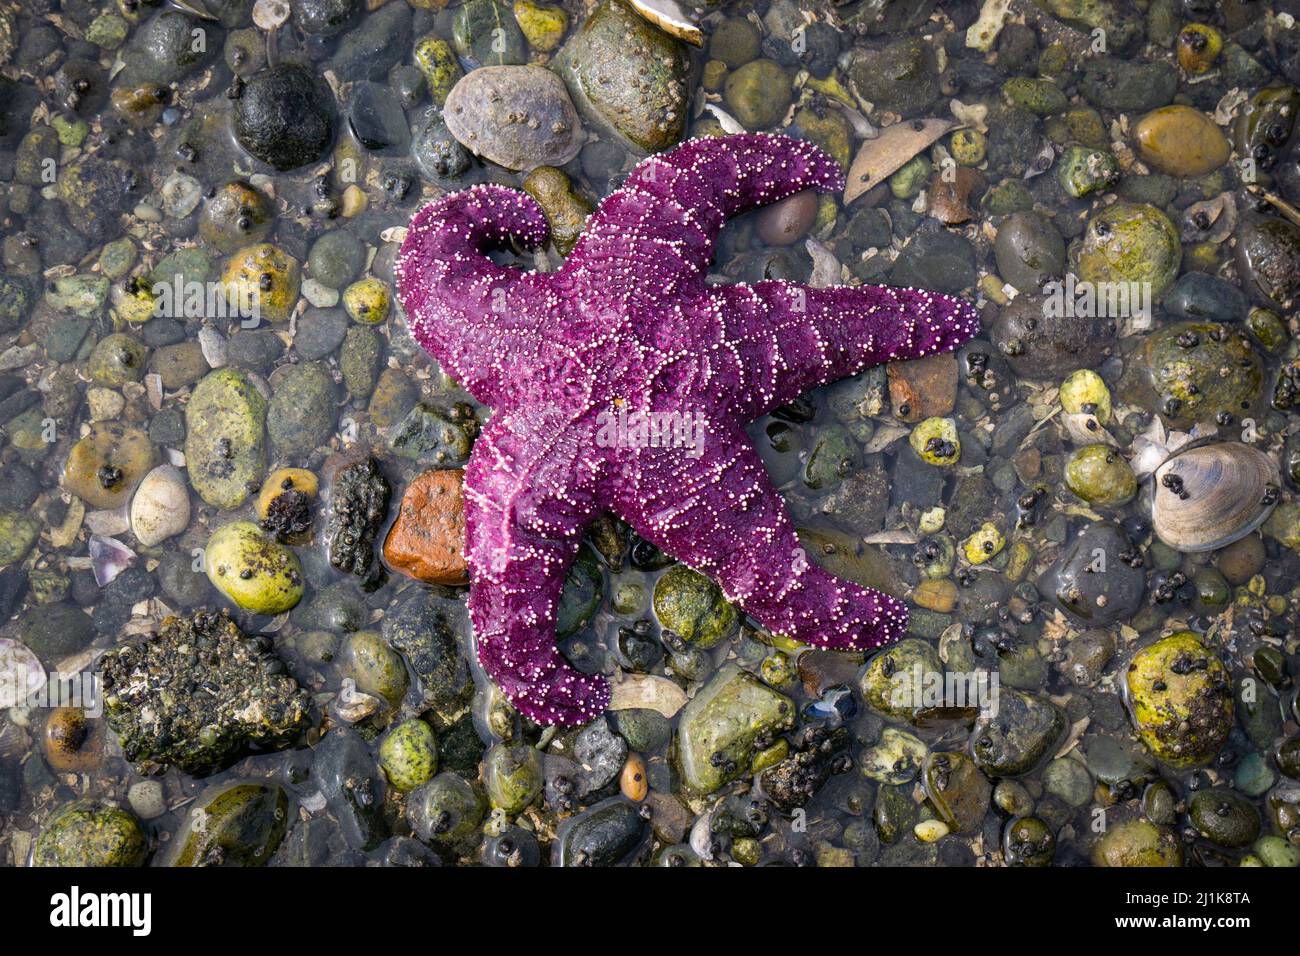 A bright purple starfish in a tidepool on the short of Maury Island Stock Photo